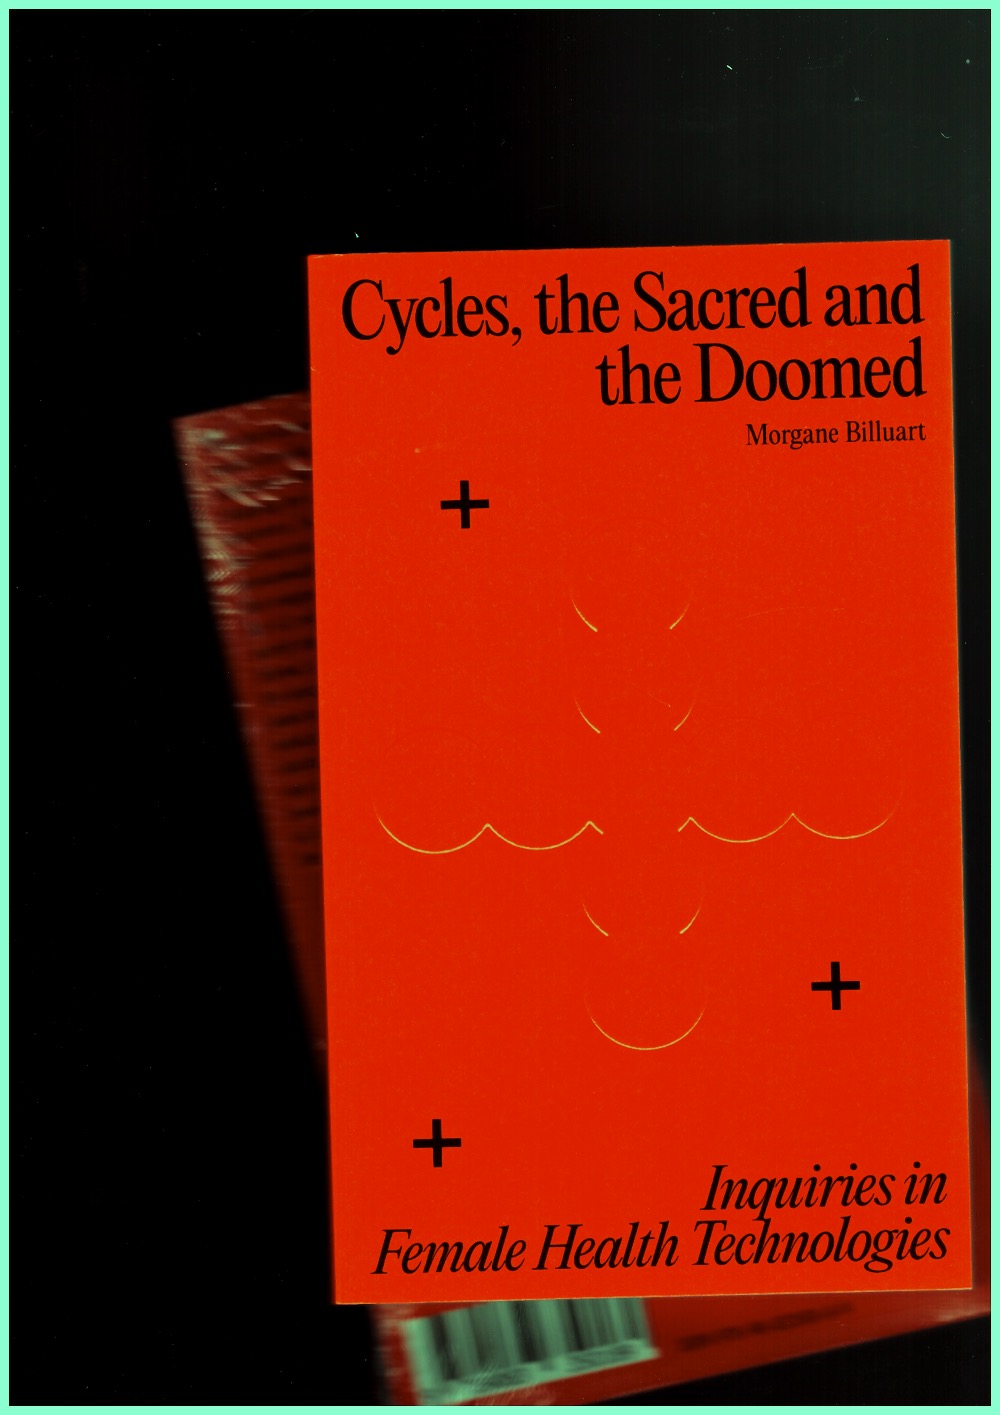 BILLUART, Morgane - Cycles, the Sacred and the Doomed. Inquiries in Female Health Technologies